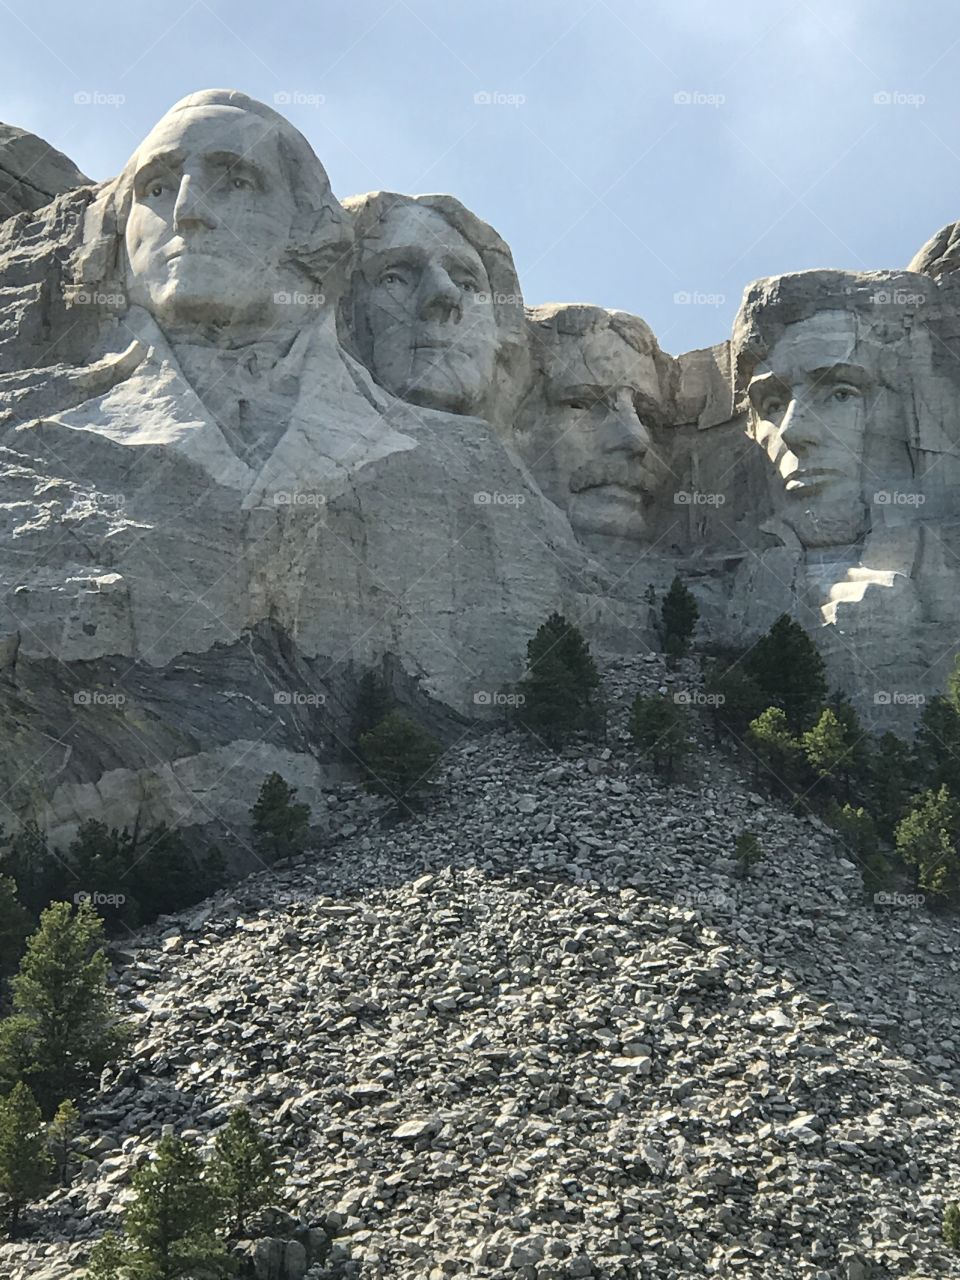 Mt. Rushmore National Park, SD